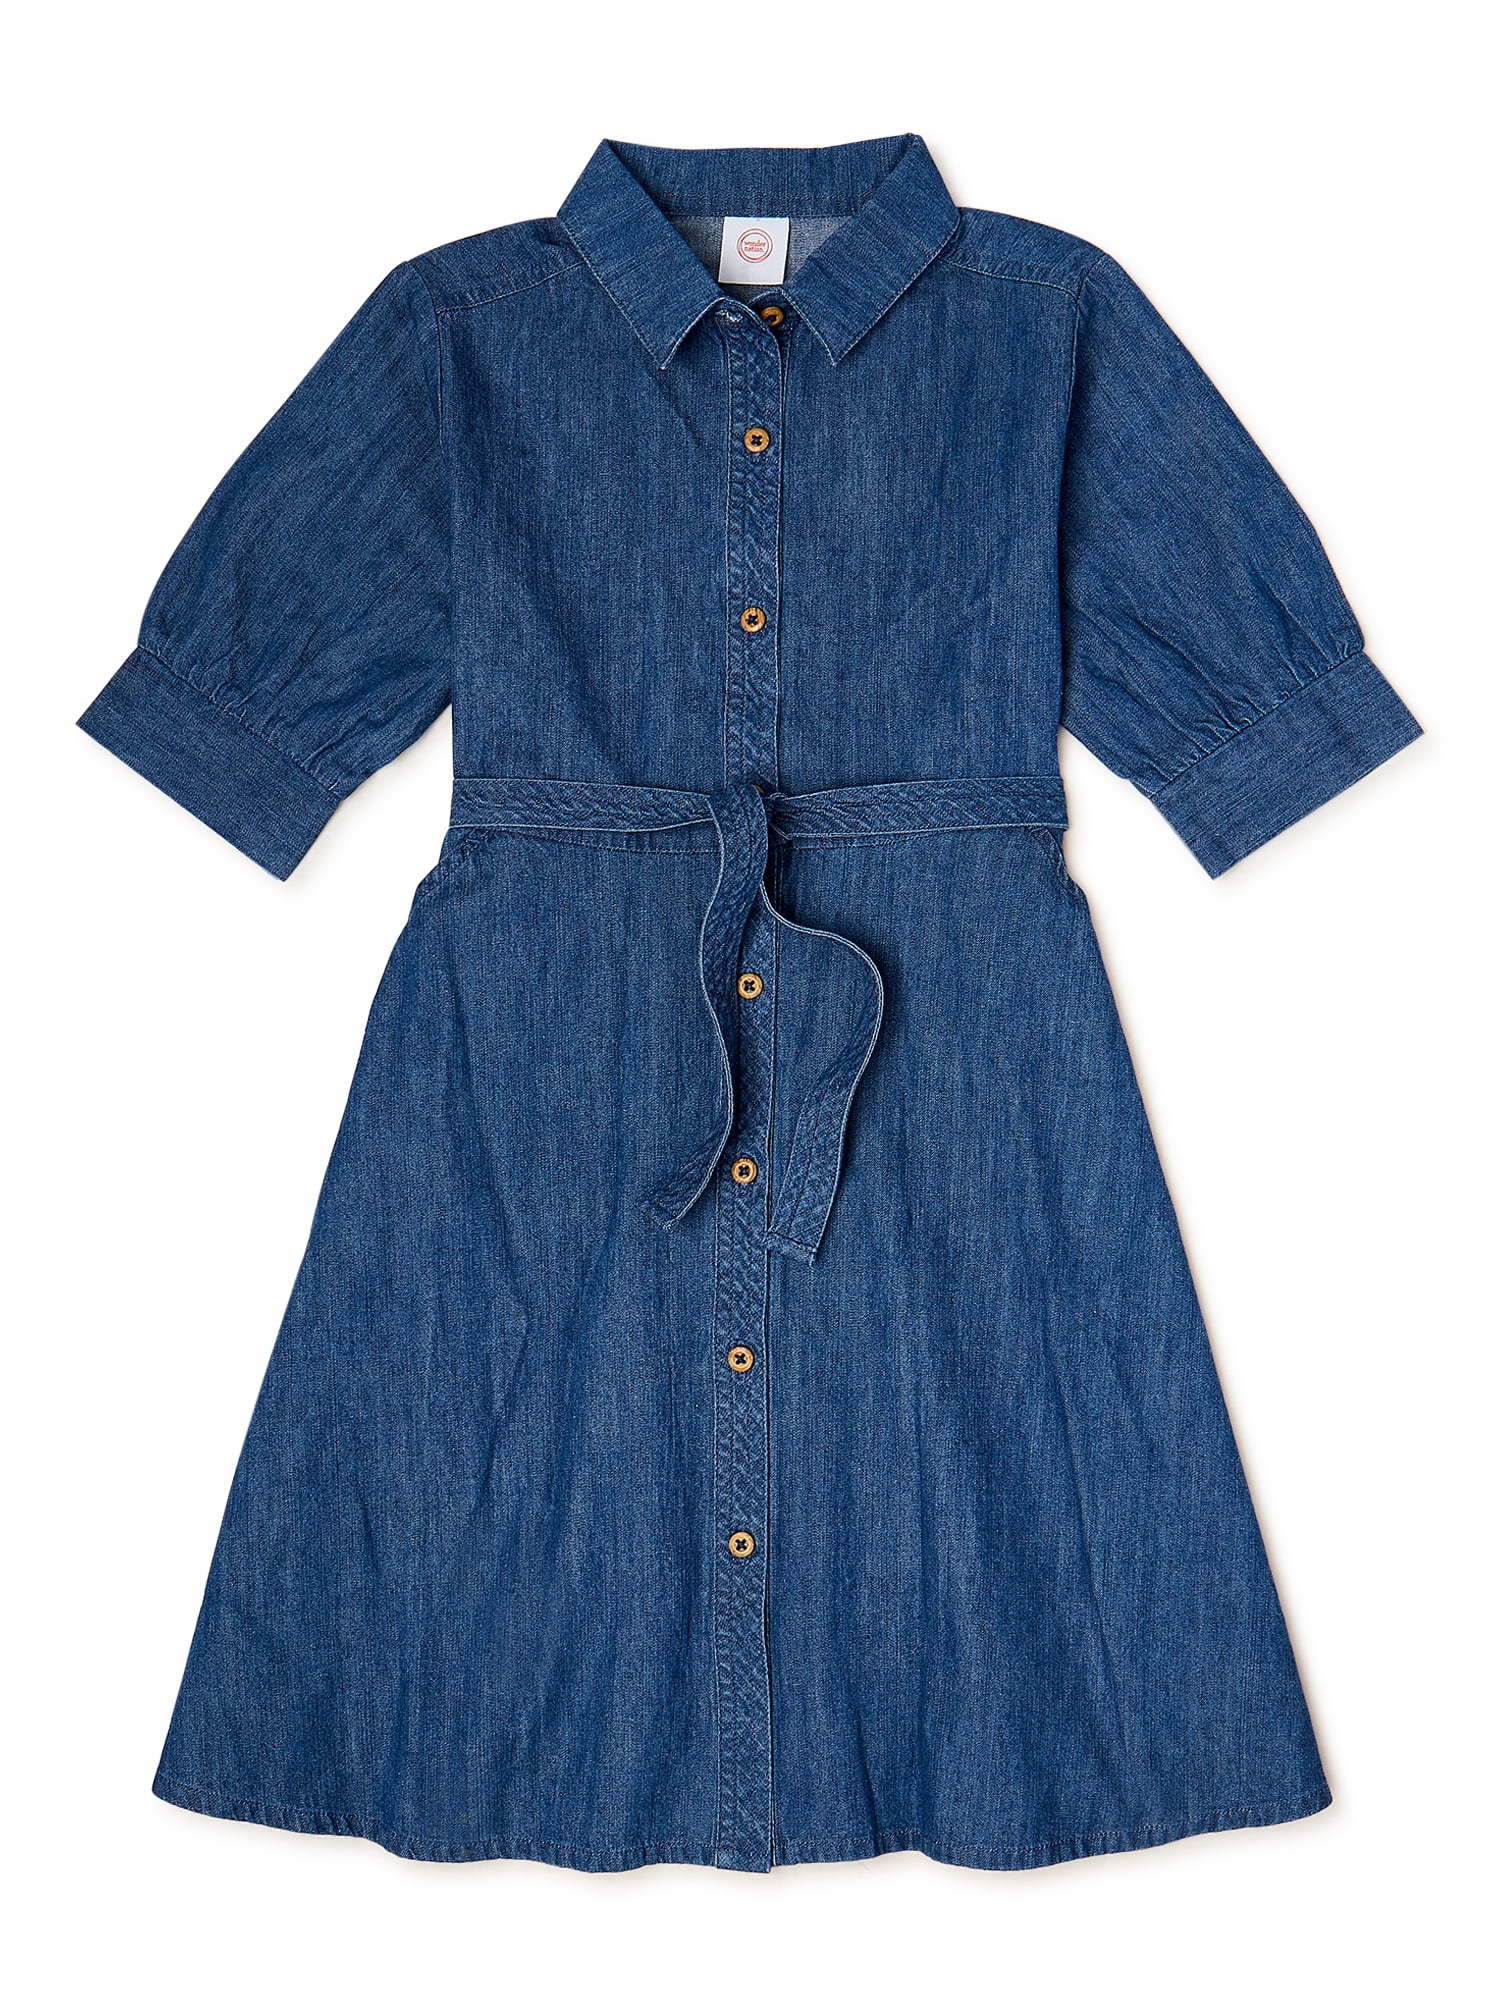 Wonder Nation Girls Collared Shirt Dress with Elbow Sleeves, Sizes 4-18 ...